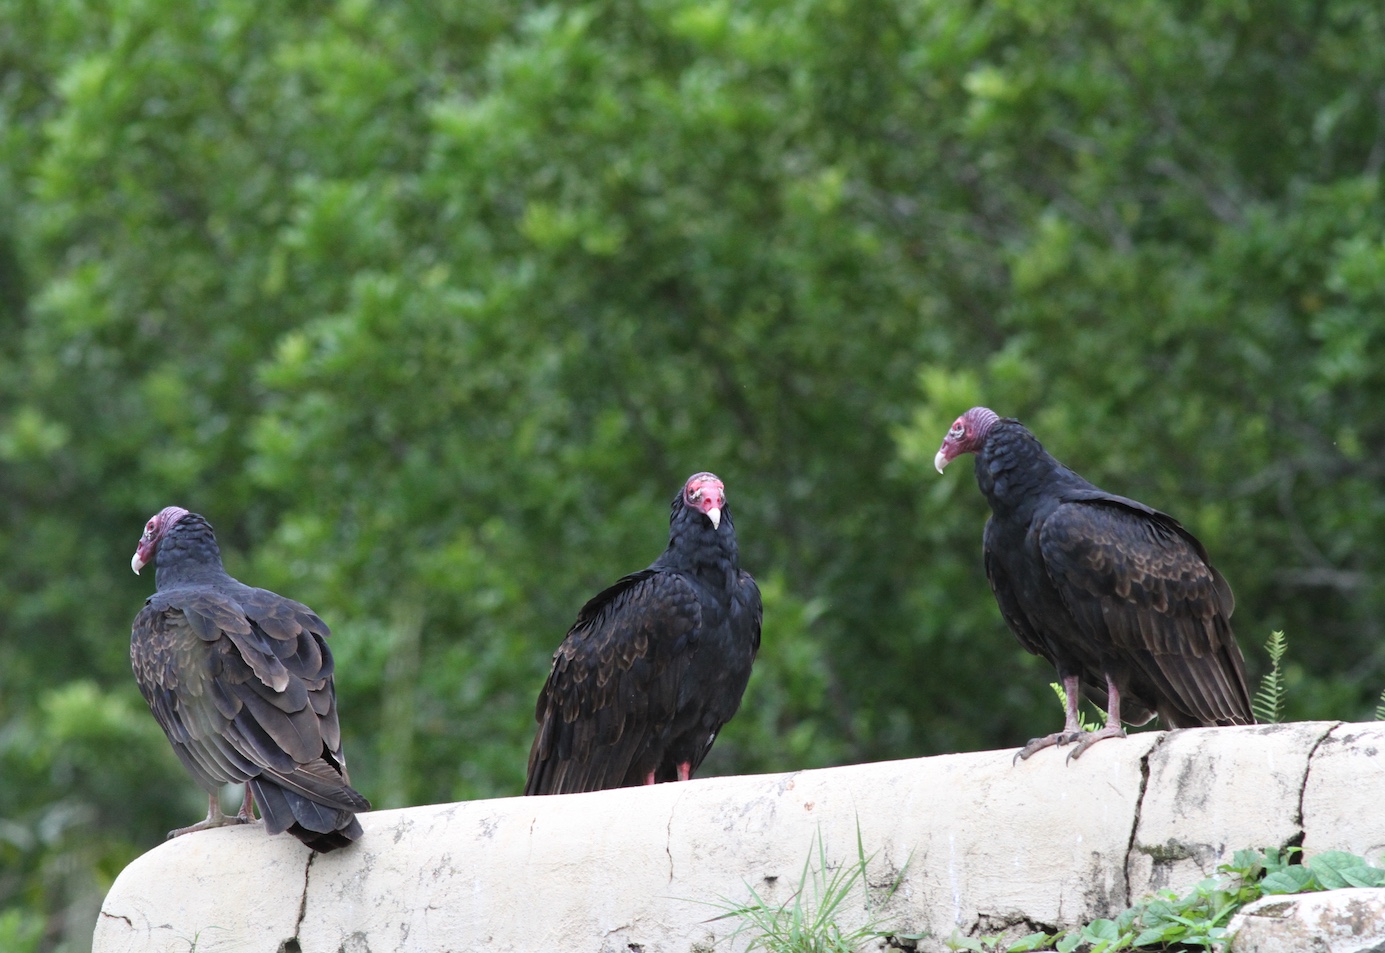 Adult turkey vultures can be identified by their red, featherless heads.